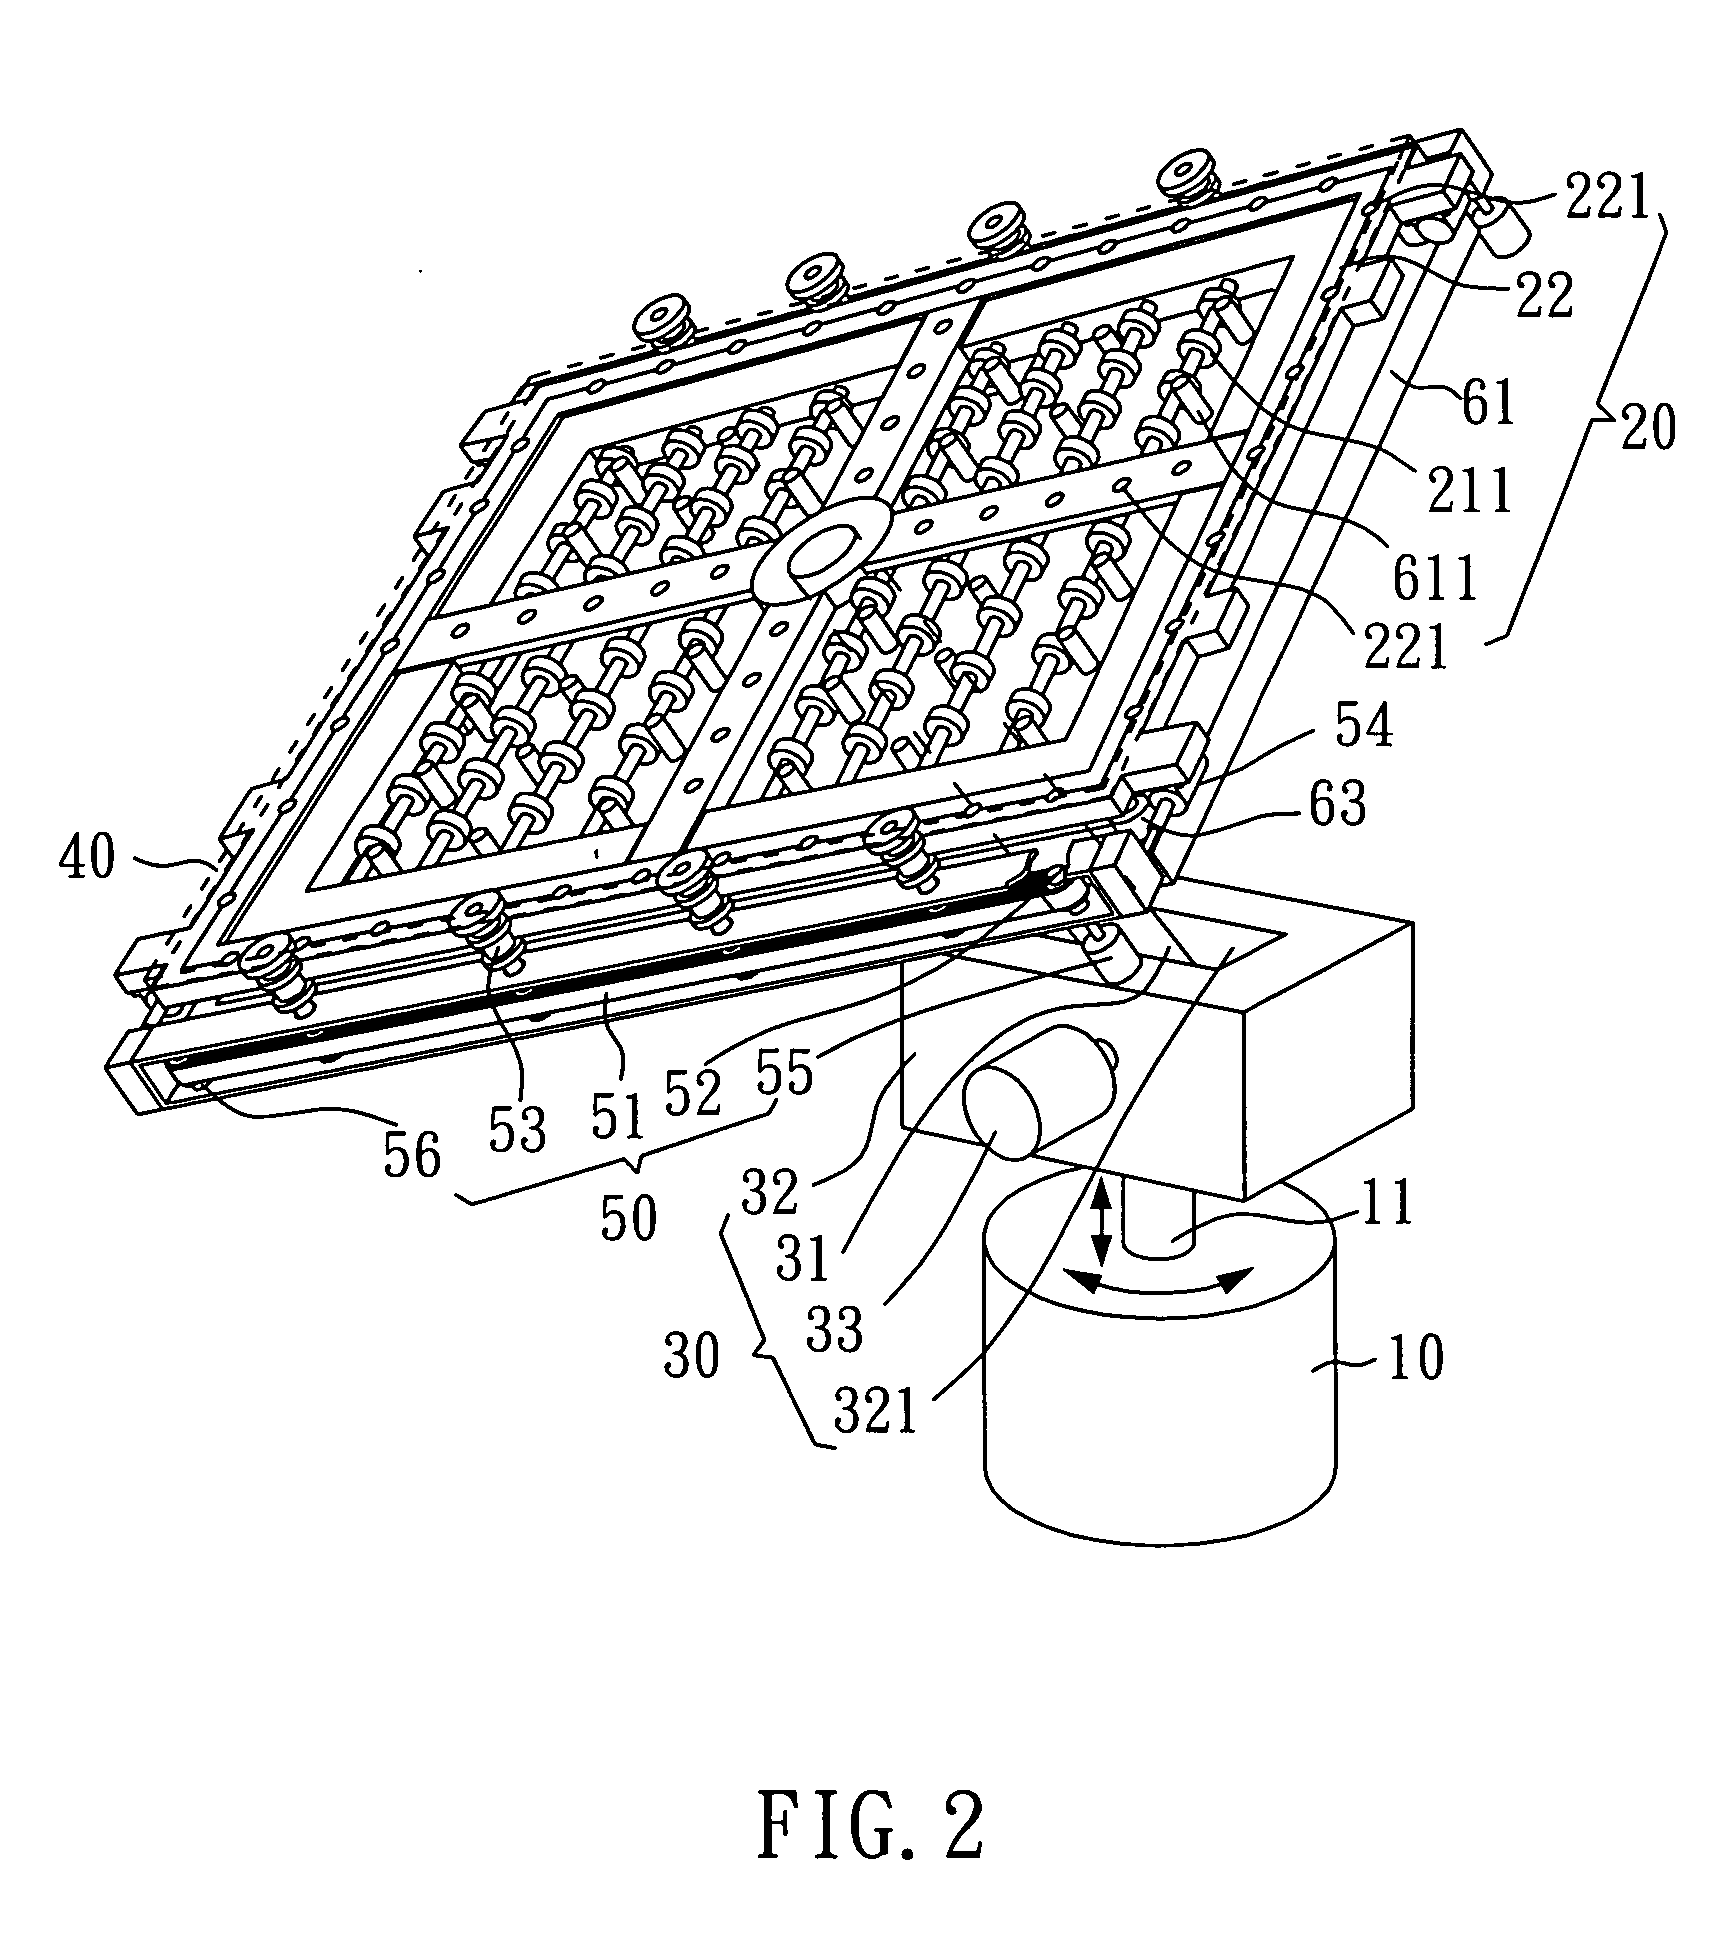 Substrate-transporting device